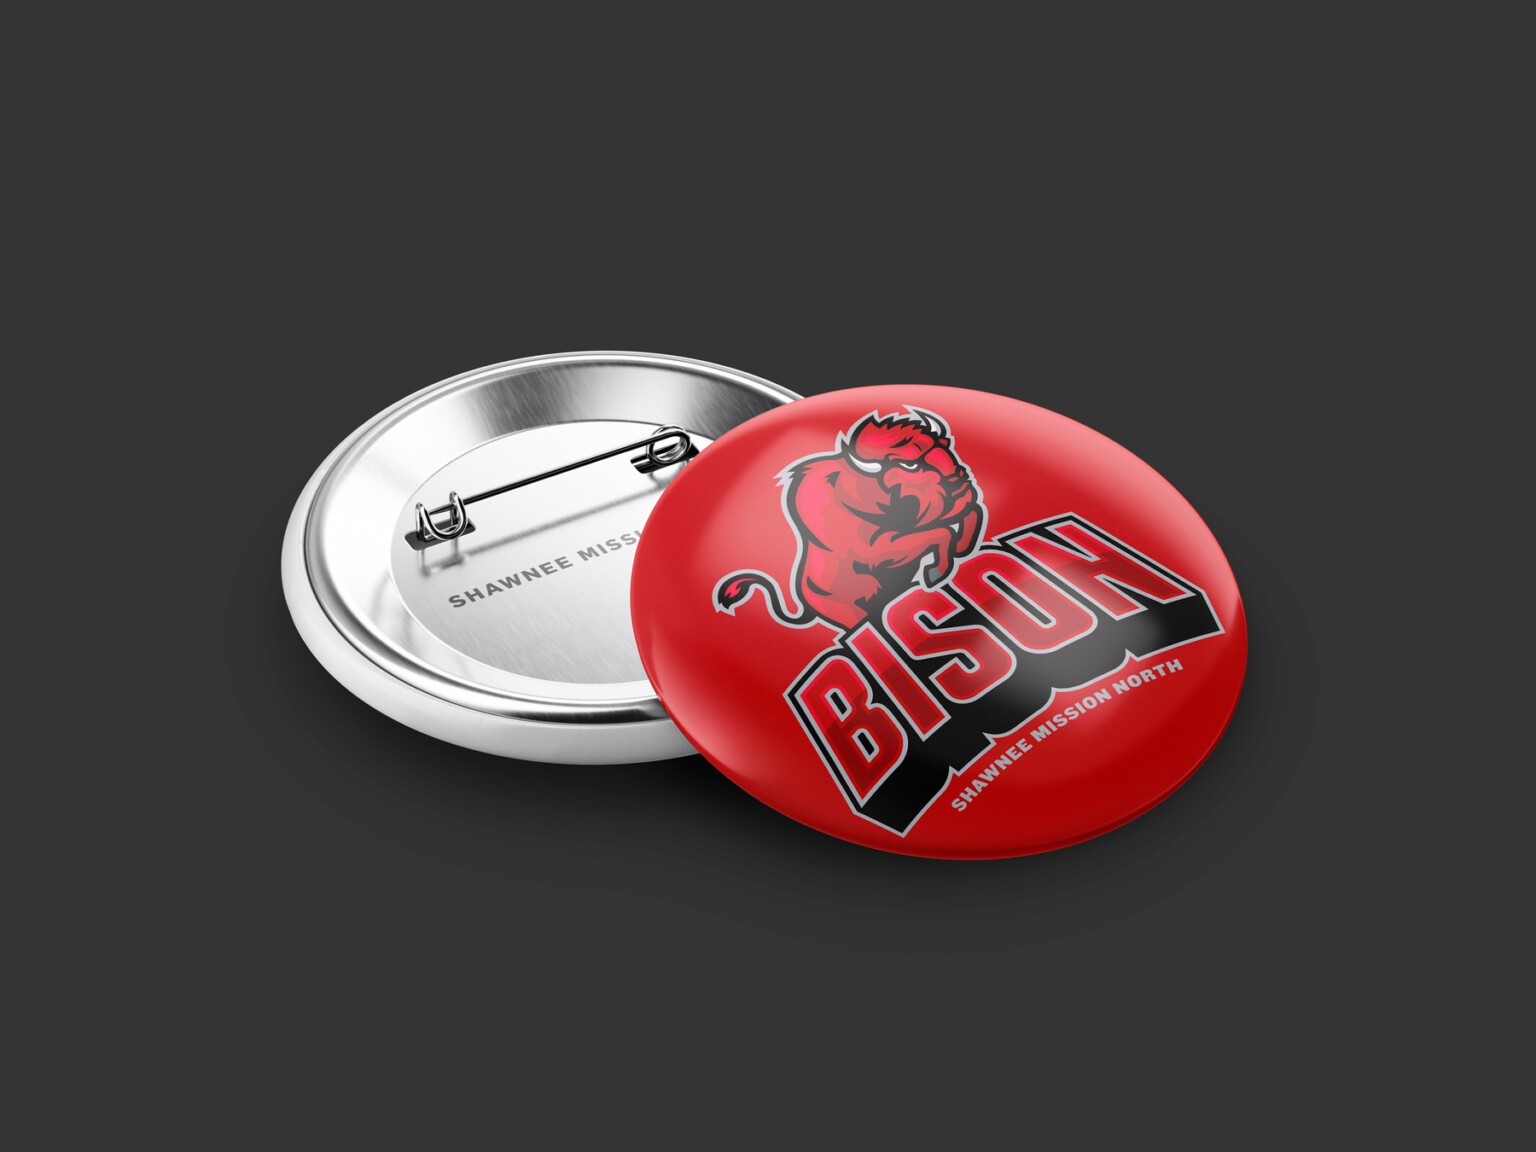 Red button pin with logo and Bison written across the bottom